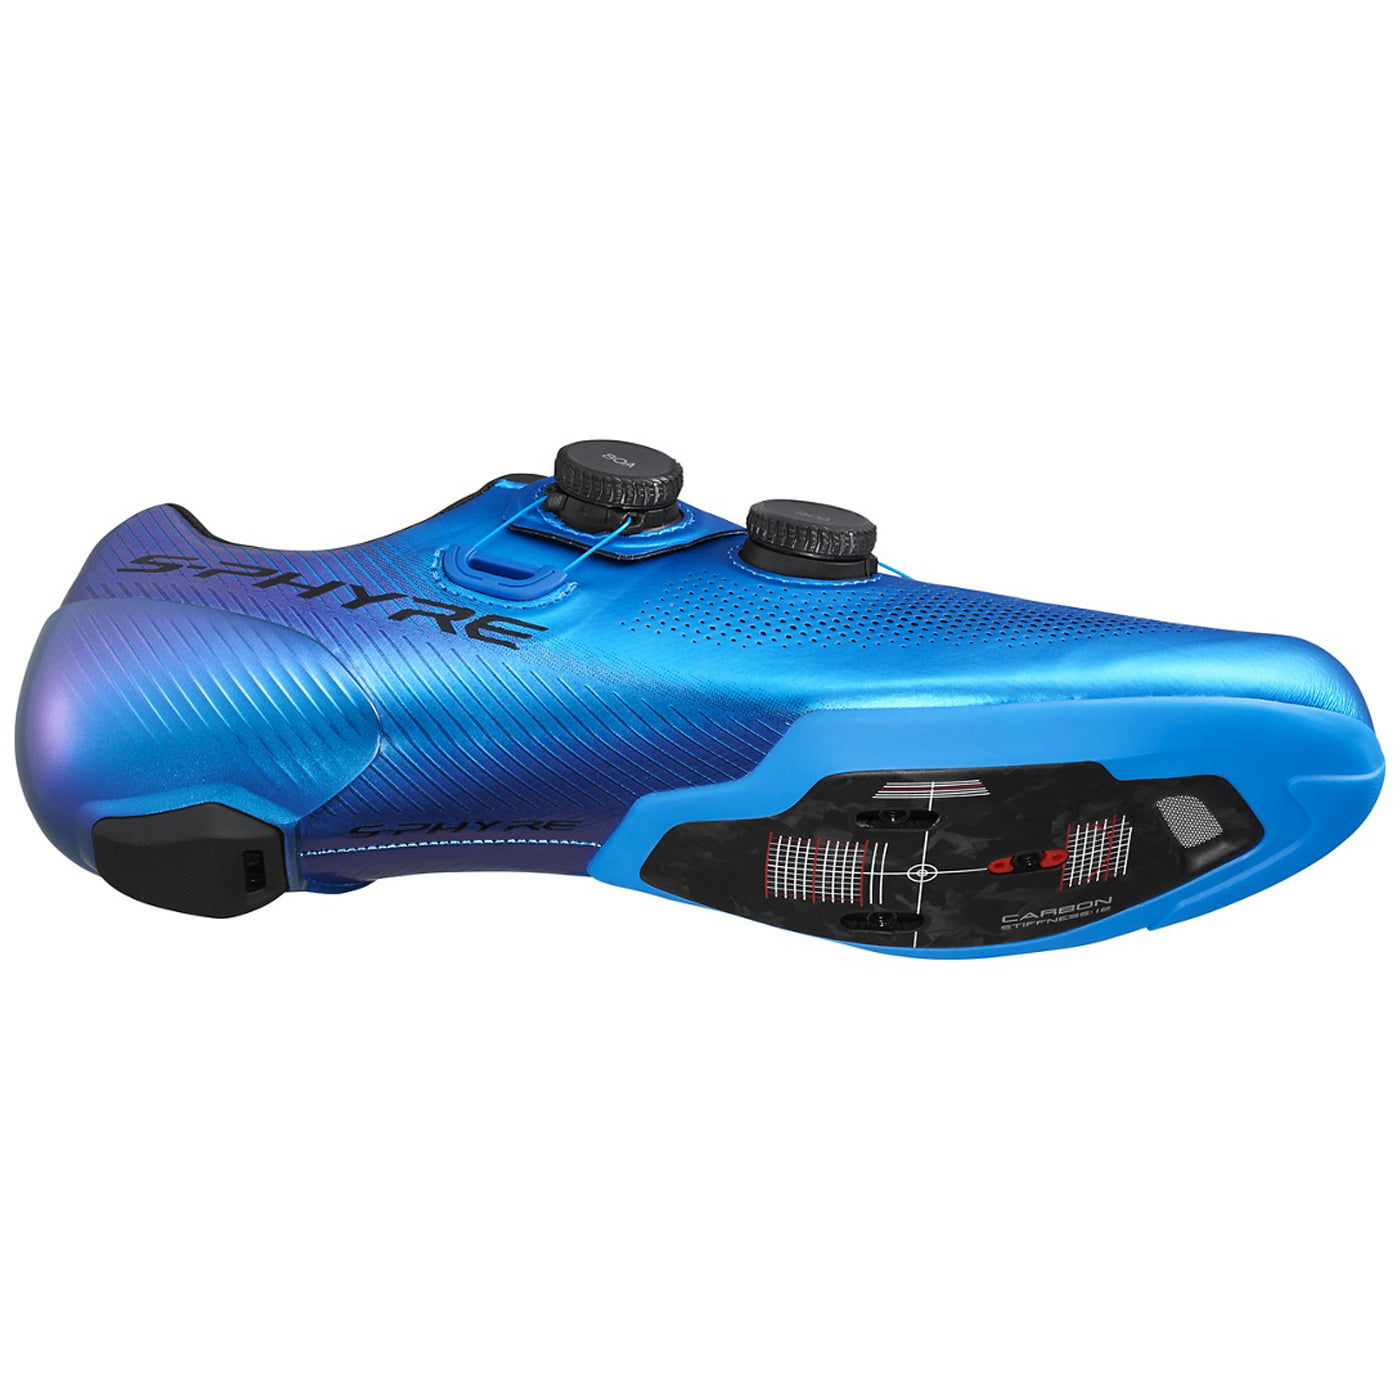 Shimano S-Phyre RC903 shoes - Blue